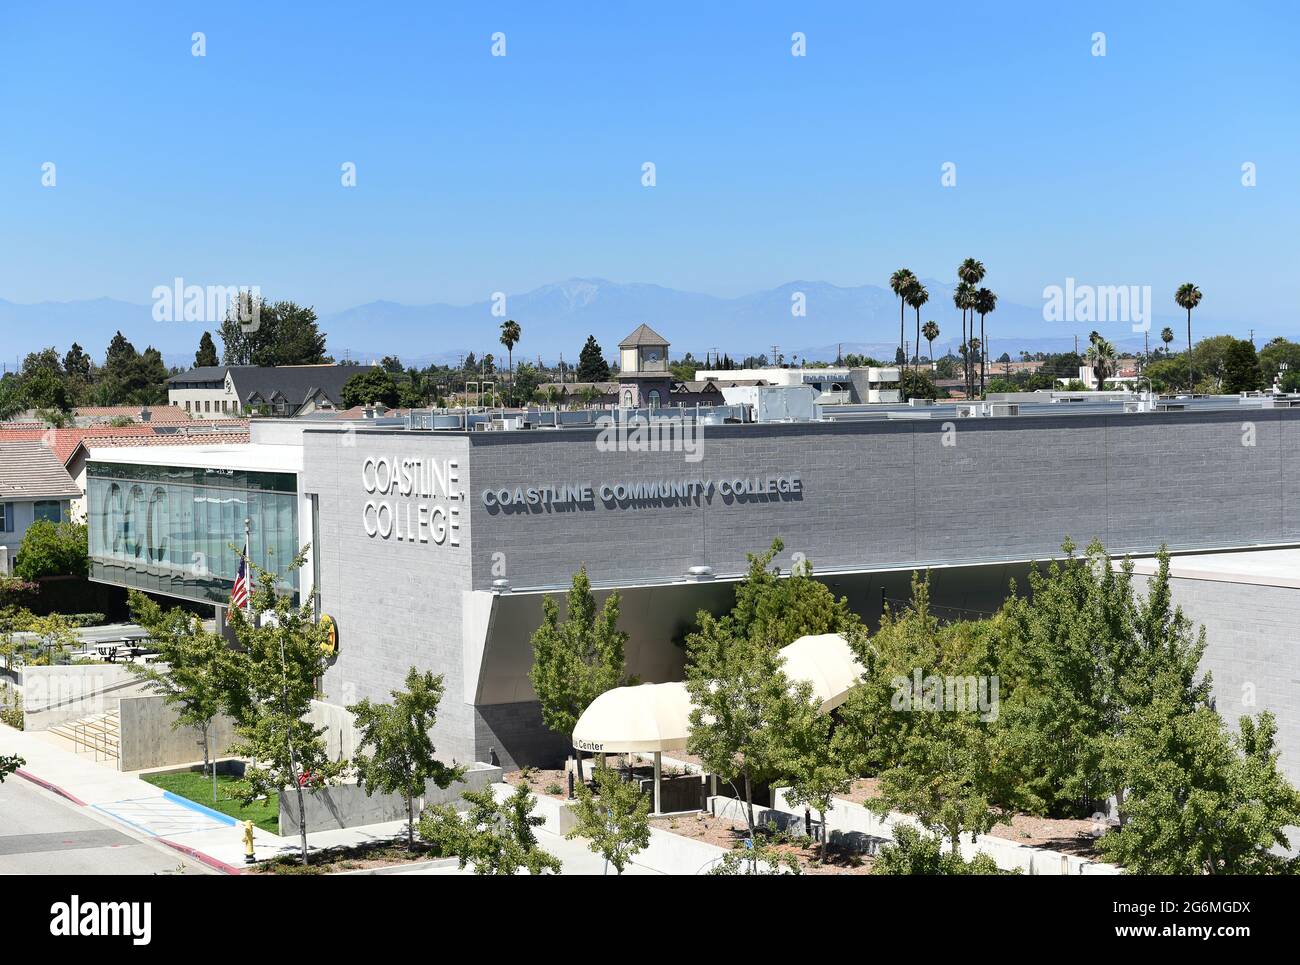 WESTMINSTER, CALIFORNIA - 5 JULY 2021: High angle view of the Le-Jao Campus building of Coastline Community College near Little Saigon. Stock Photo